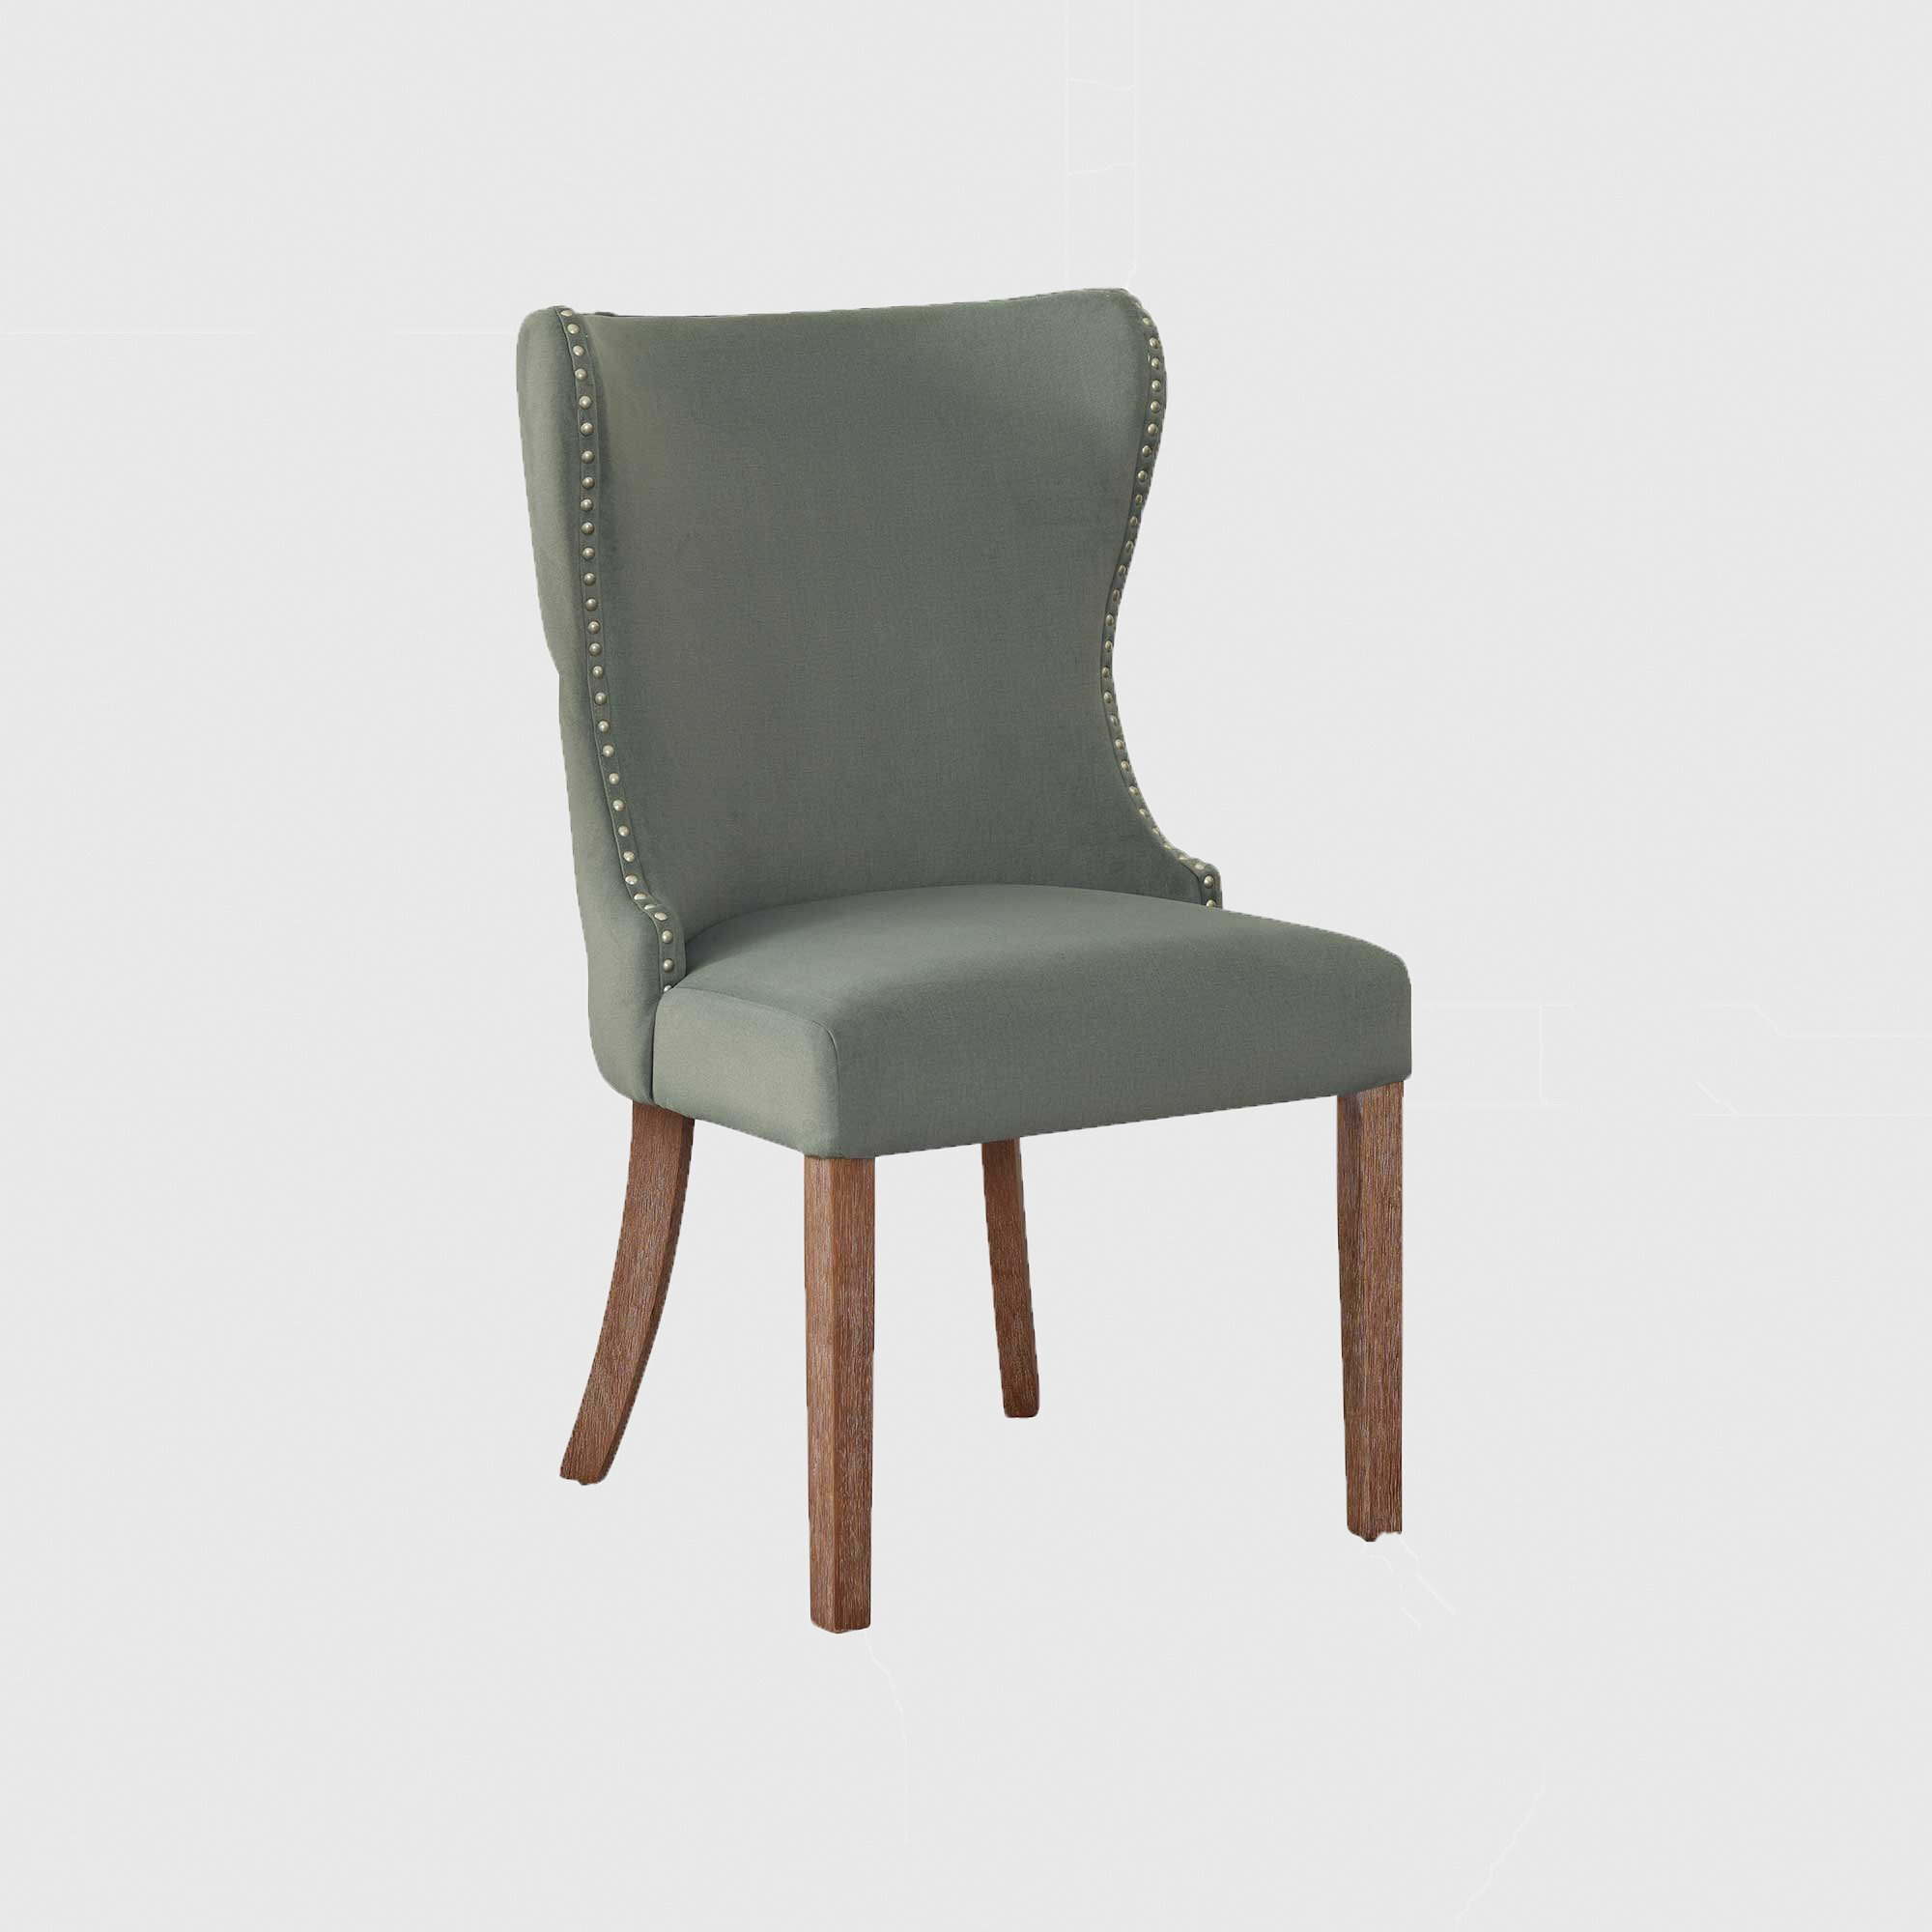 Goddard Dining Chair, Green Fabric - Barker & Stonehouse - image 1